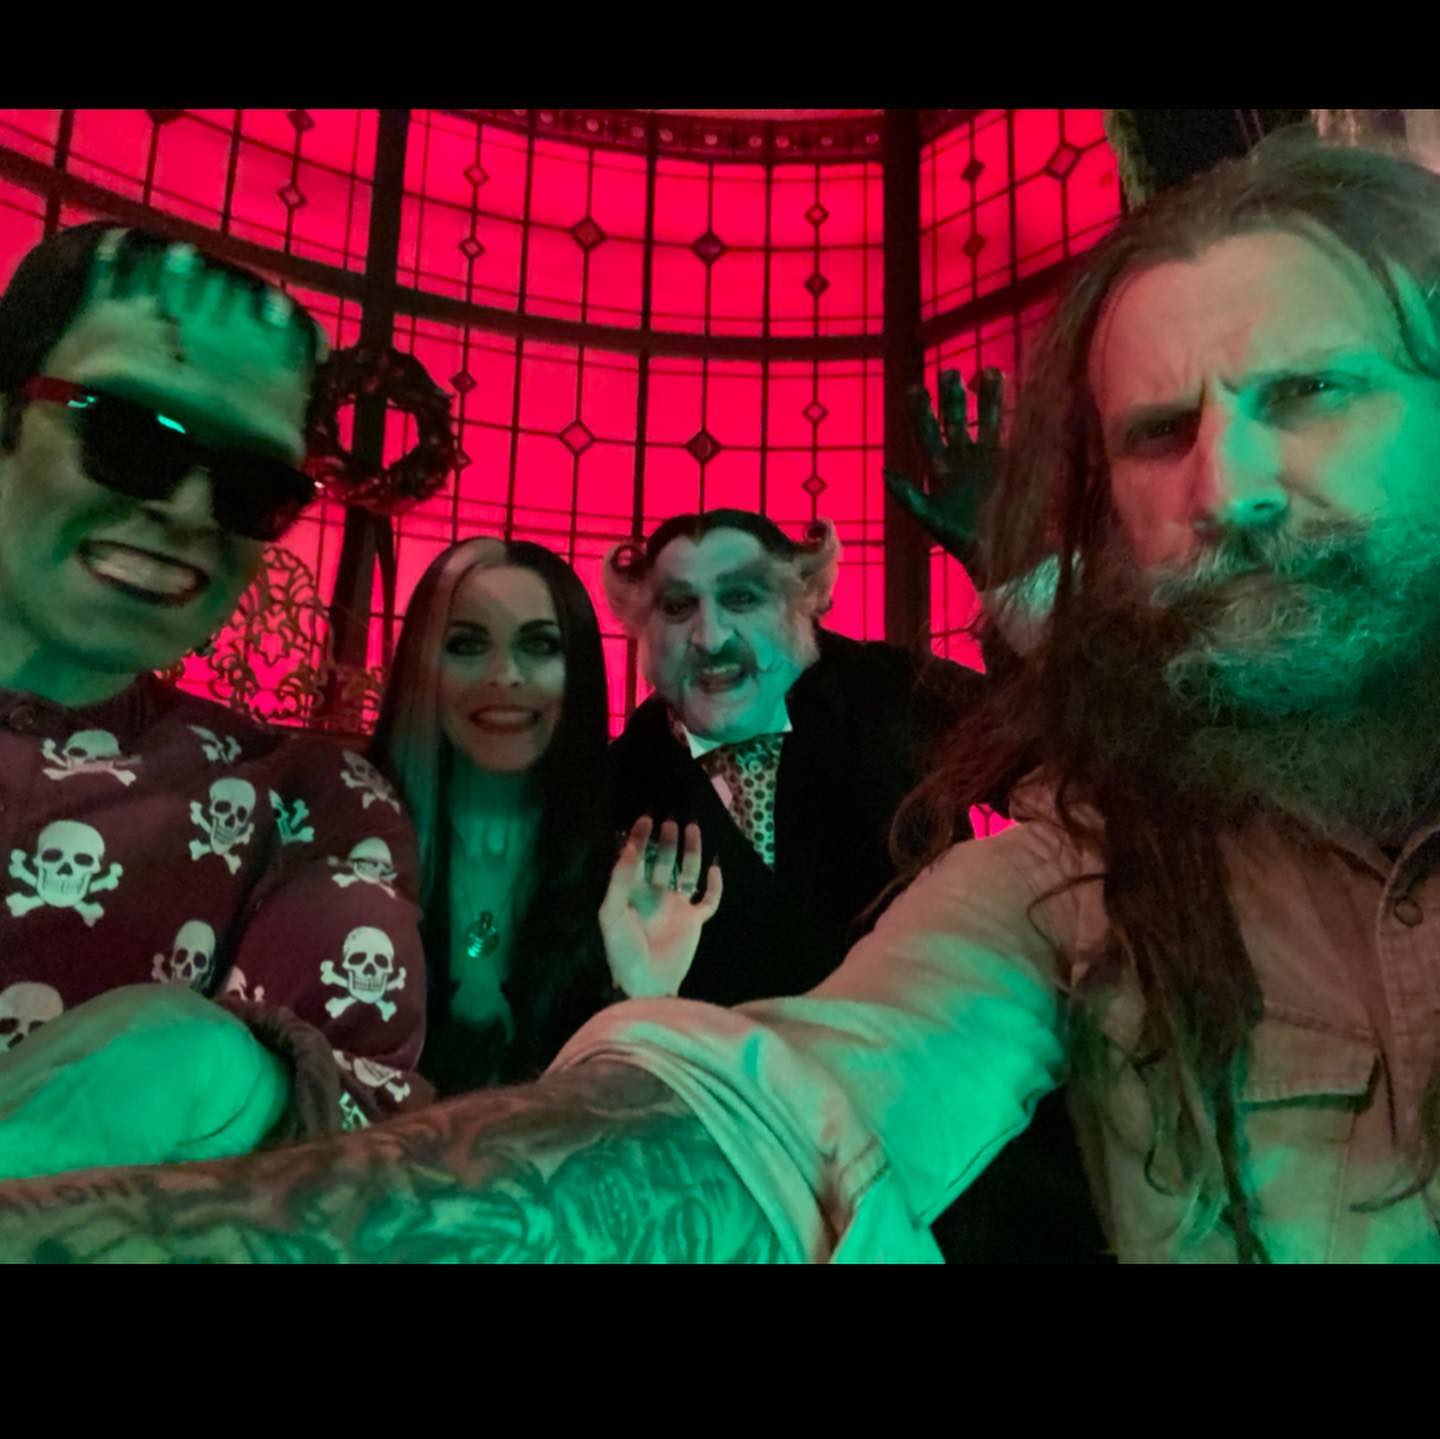 New Look at Rob Zombie’s ‘The Munsters’ - Horror News - Horror Land